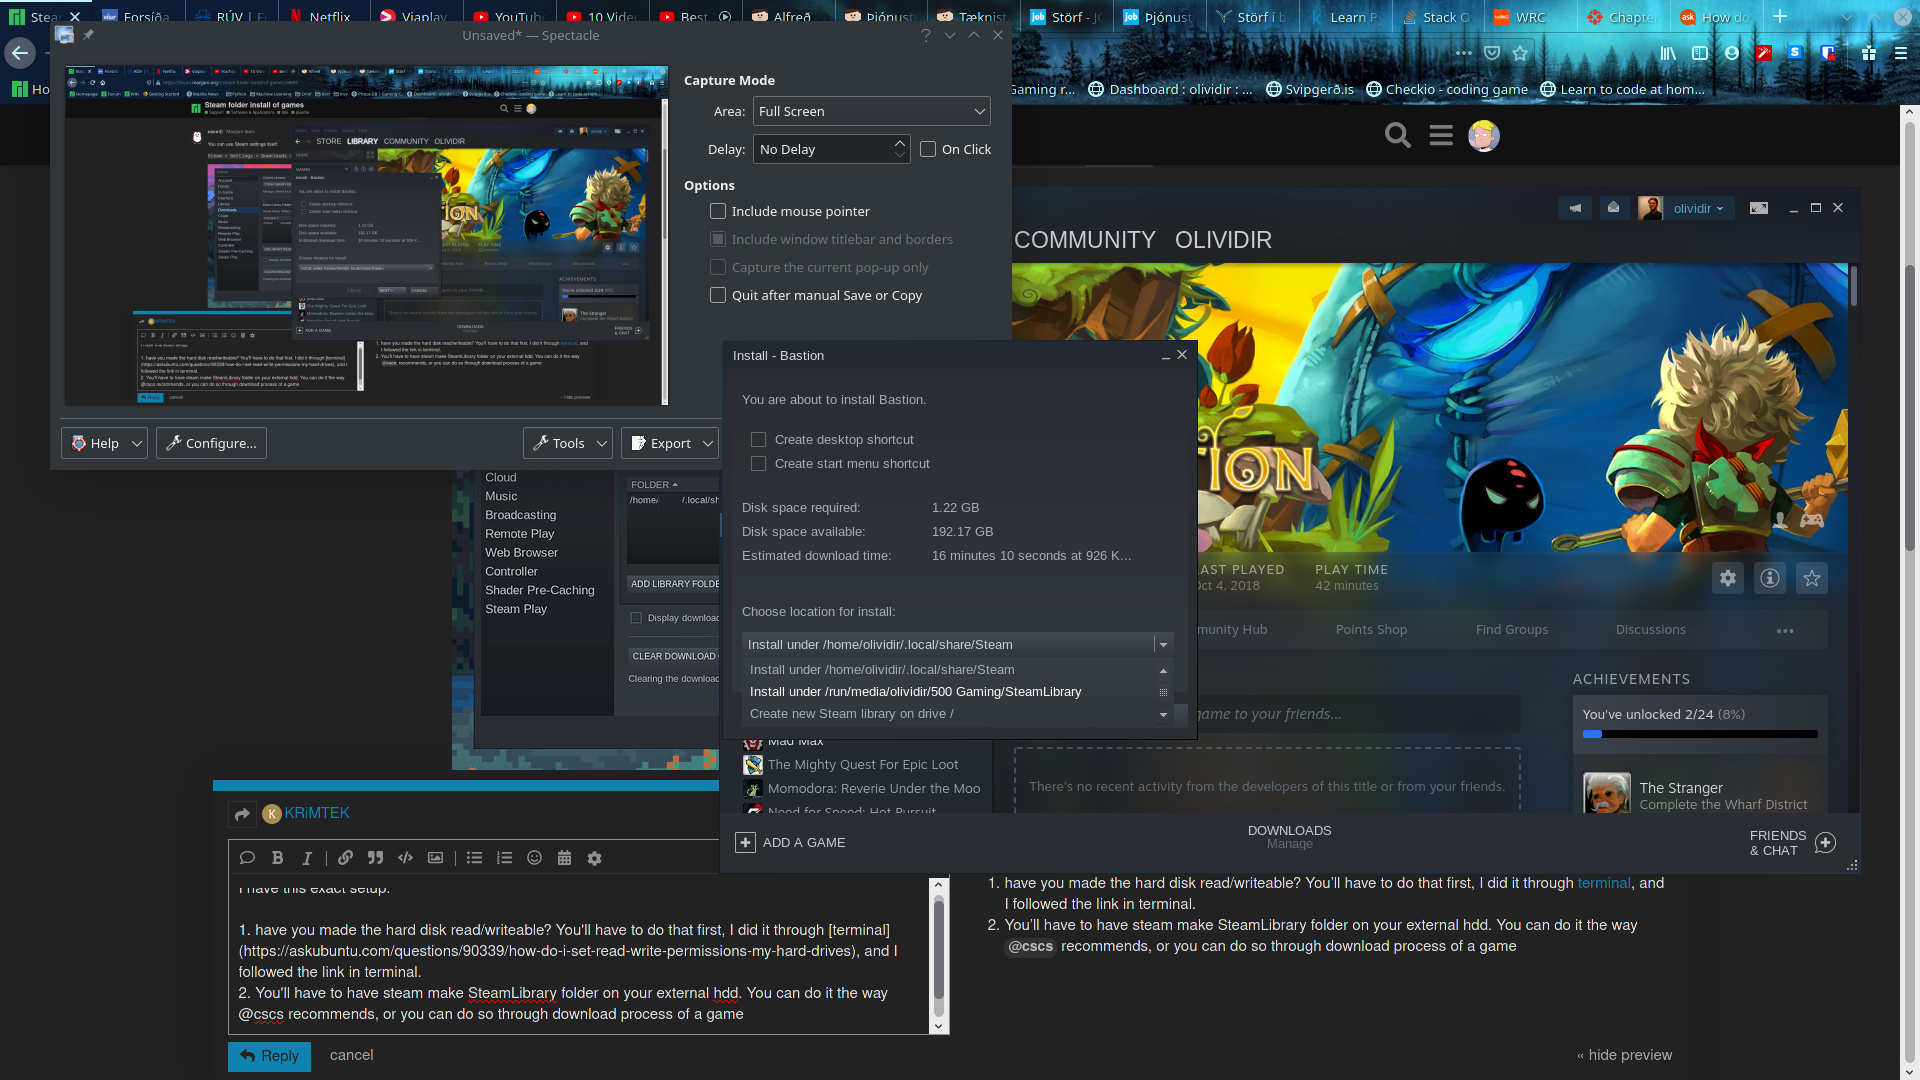 How to add external games to your Steam library